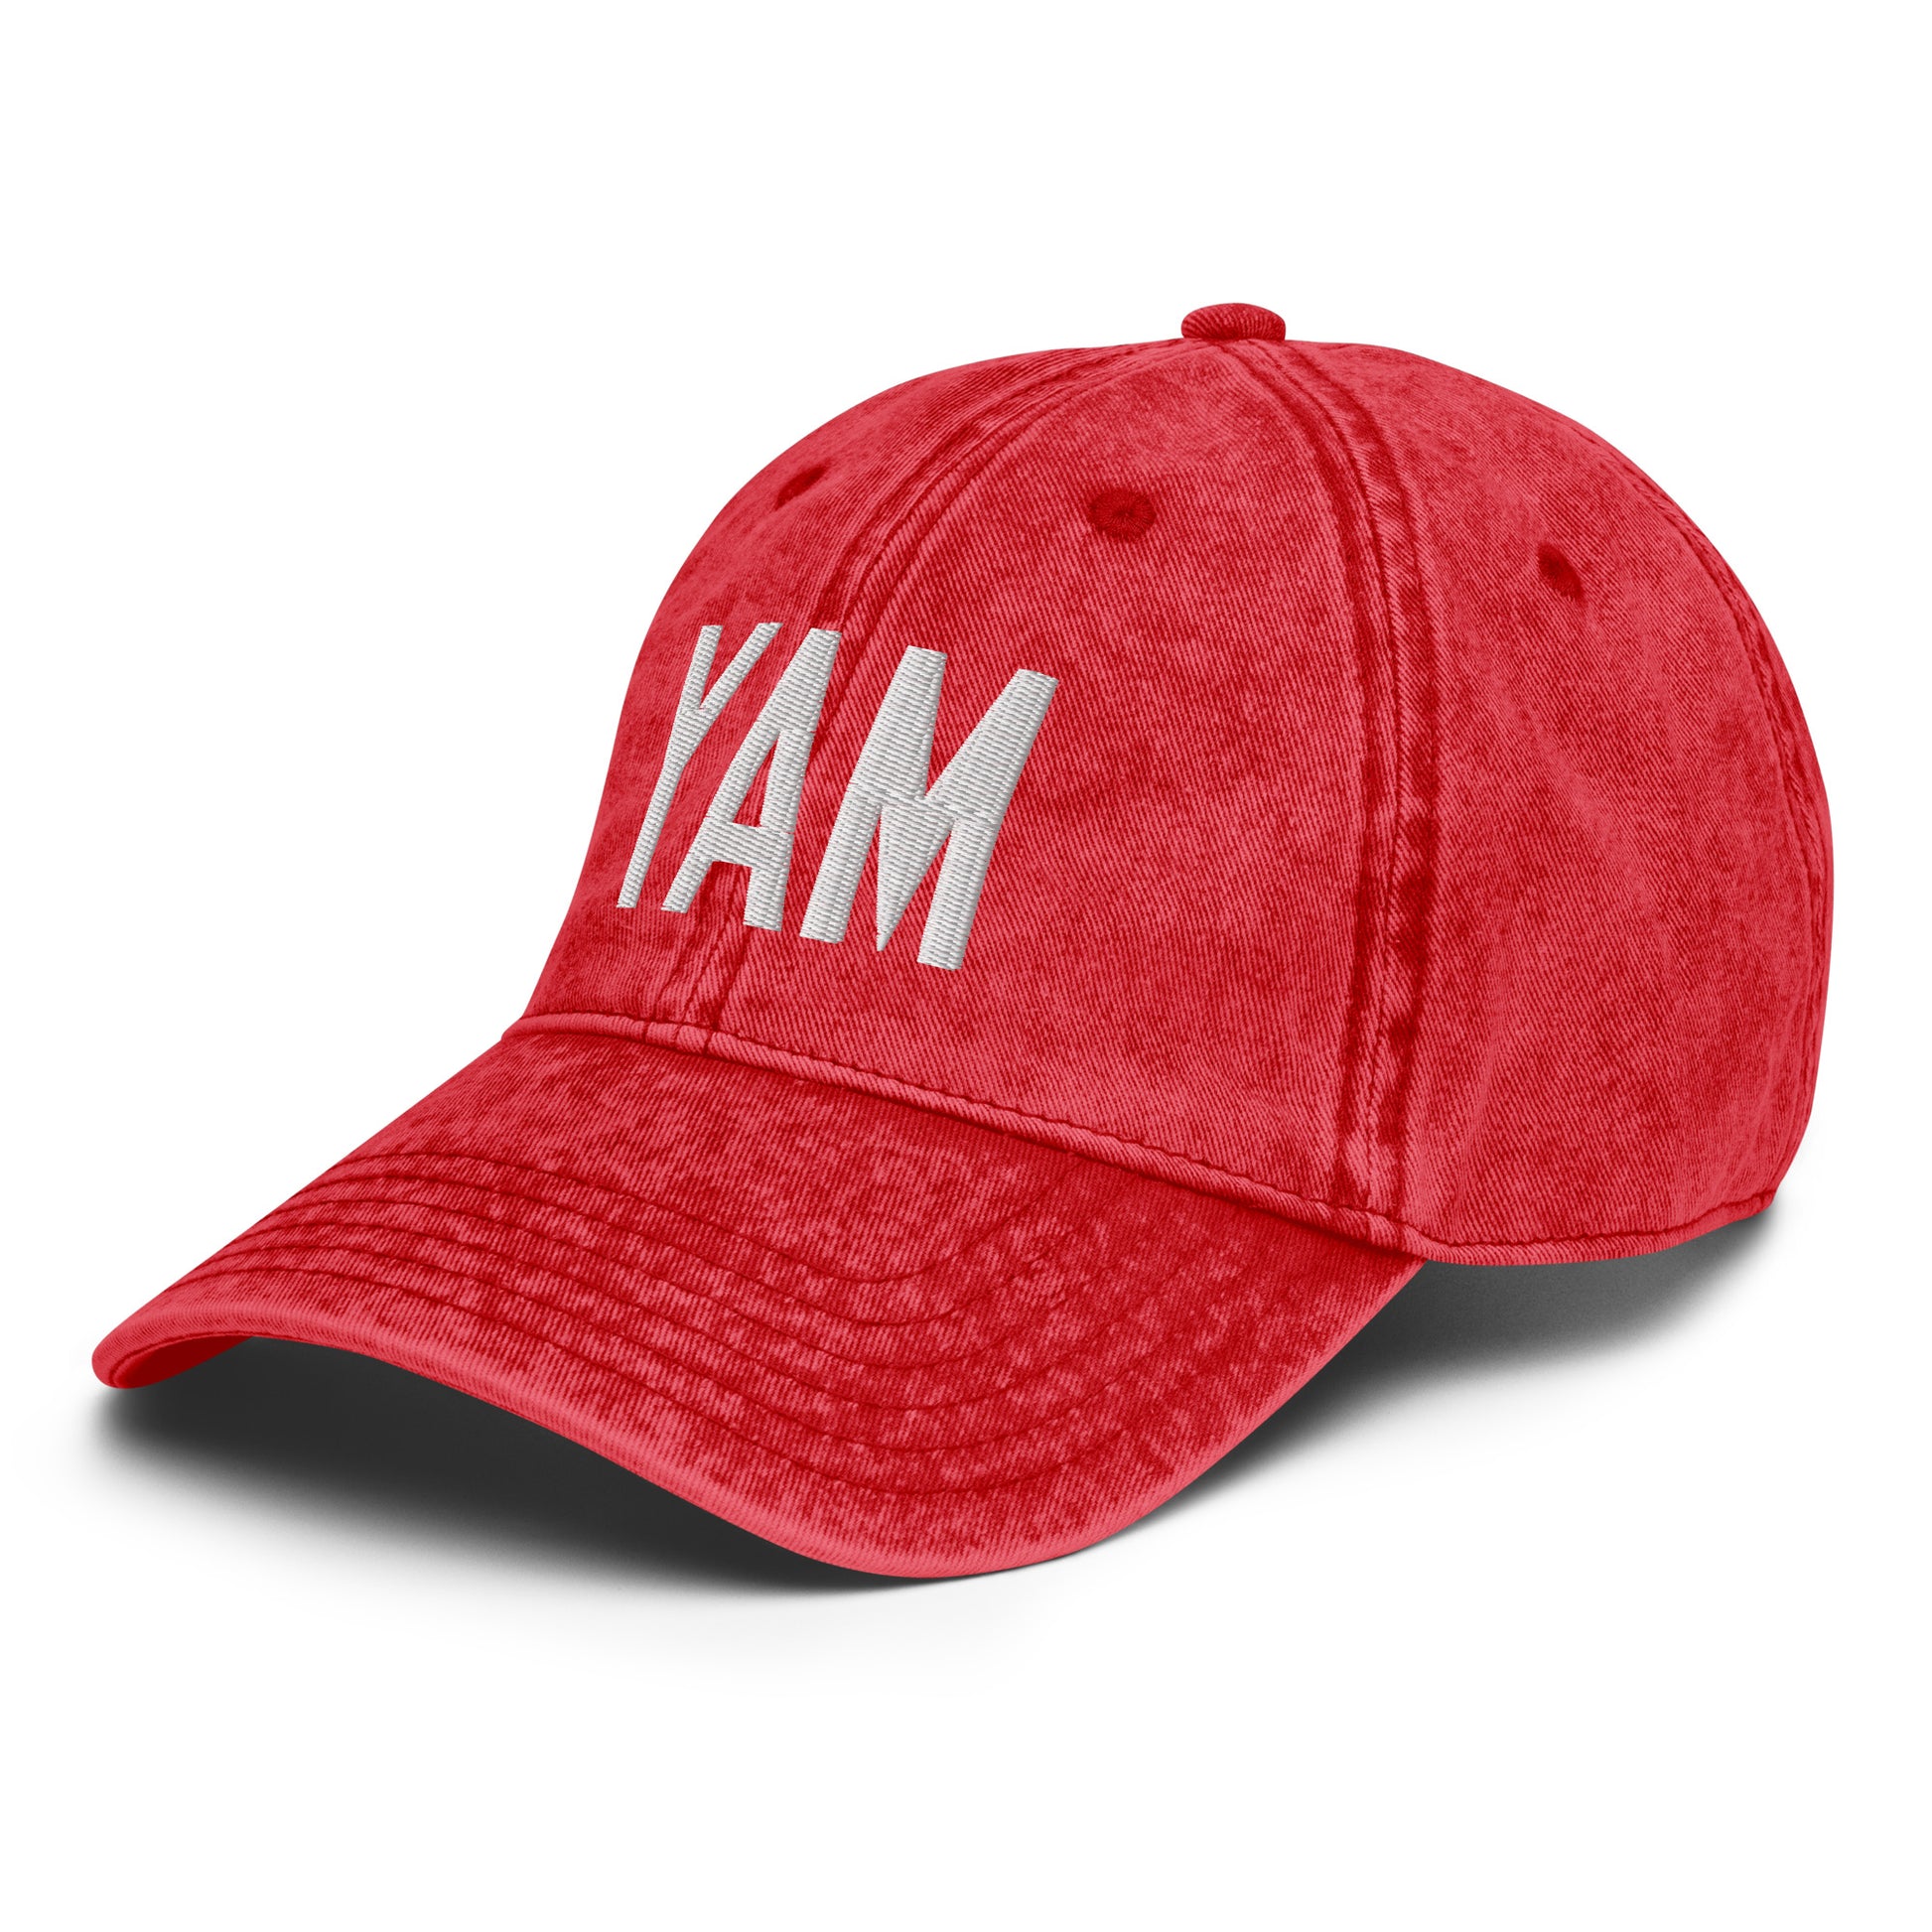 Airport Code Twill Cap - White • YAM Sault-Ste-Marie • YHM Designs - Image 23